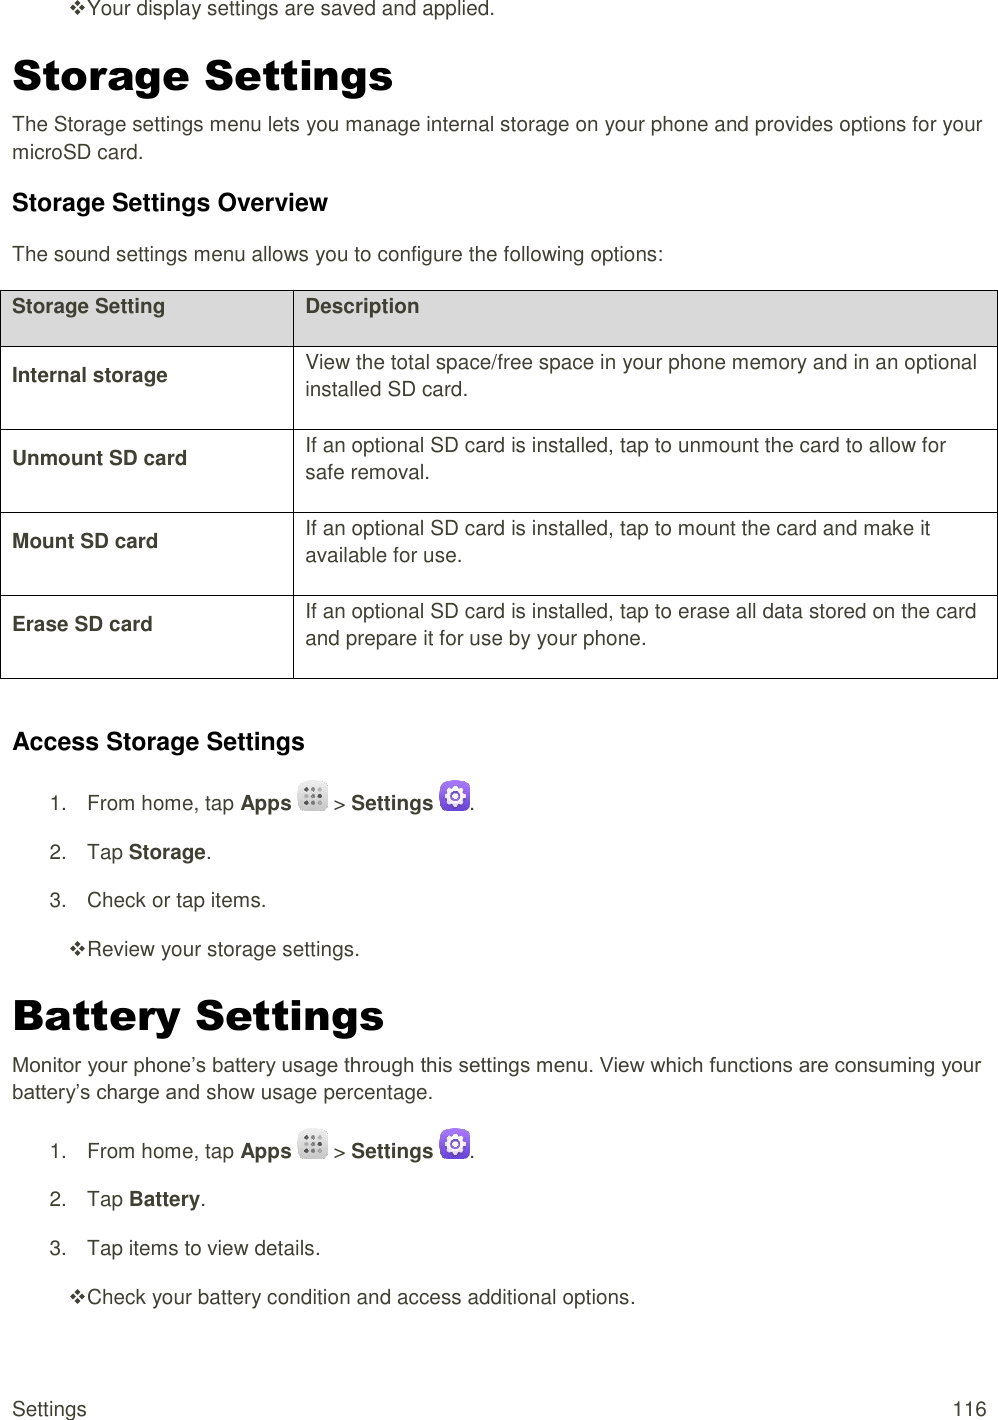 Settings  116  Your display settings are saved and applied. Storage Settings The Storage settings menu lets you manage internal storage on your phone and provides options for your microSD card. Storage Settings Overview The sound settings menu allows you to configure the following options: Storage Setting Description Internal storage View the total space/free space in your phone memory and in an optional installed SD card. Unmount SD card If an optional SD card is installed, tap to unmount the card to allow for safe removal. Mount SD card If an optional SD card is installed, tap to mount the card and make it available for use. Erase SD card If an optional SD card is installed, tap to erase all data stored on the card and prepare it for use by your phone.  Access Storage Settings 1.  From home, tap Apps   &gt; Settings  . 2.  Tap Storage. 3.  Check or tap items.  Review your storage settings. Battery Settings Monitor your phone’s battery usage through this settings menu. View which functions are consuming your battery’s charge and show usage percentage. 1.  From home, tap Apps   &gt; Settings  . 2.  Tap Battery. 3.  Tap items to view details.   Check your battery condition and access additional options. 